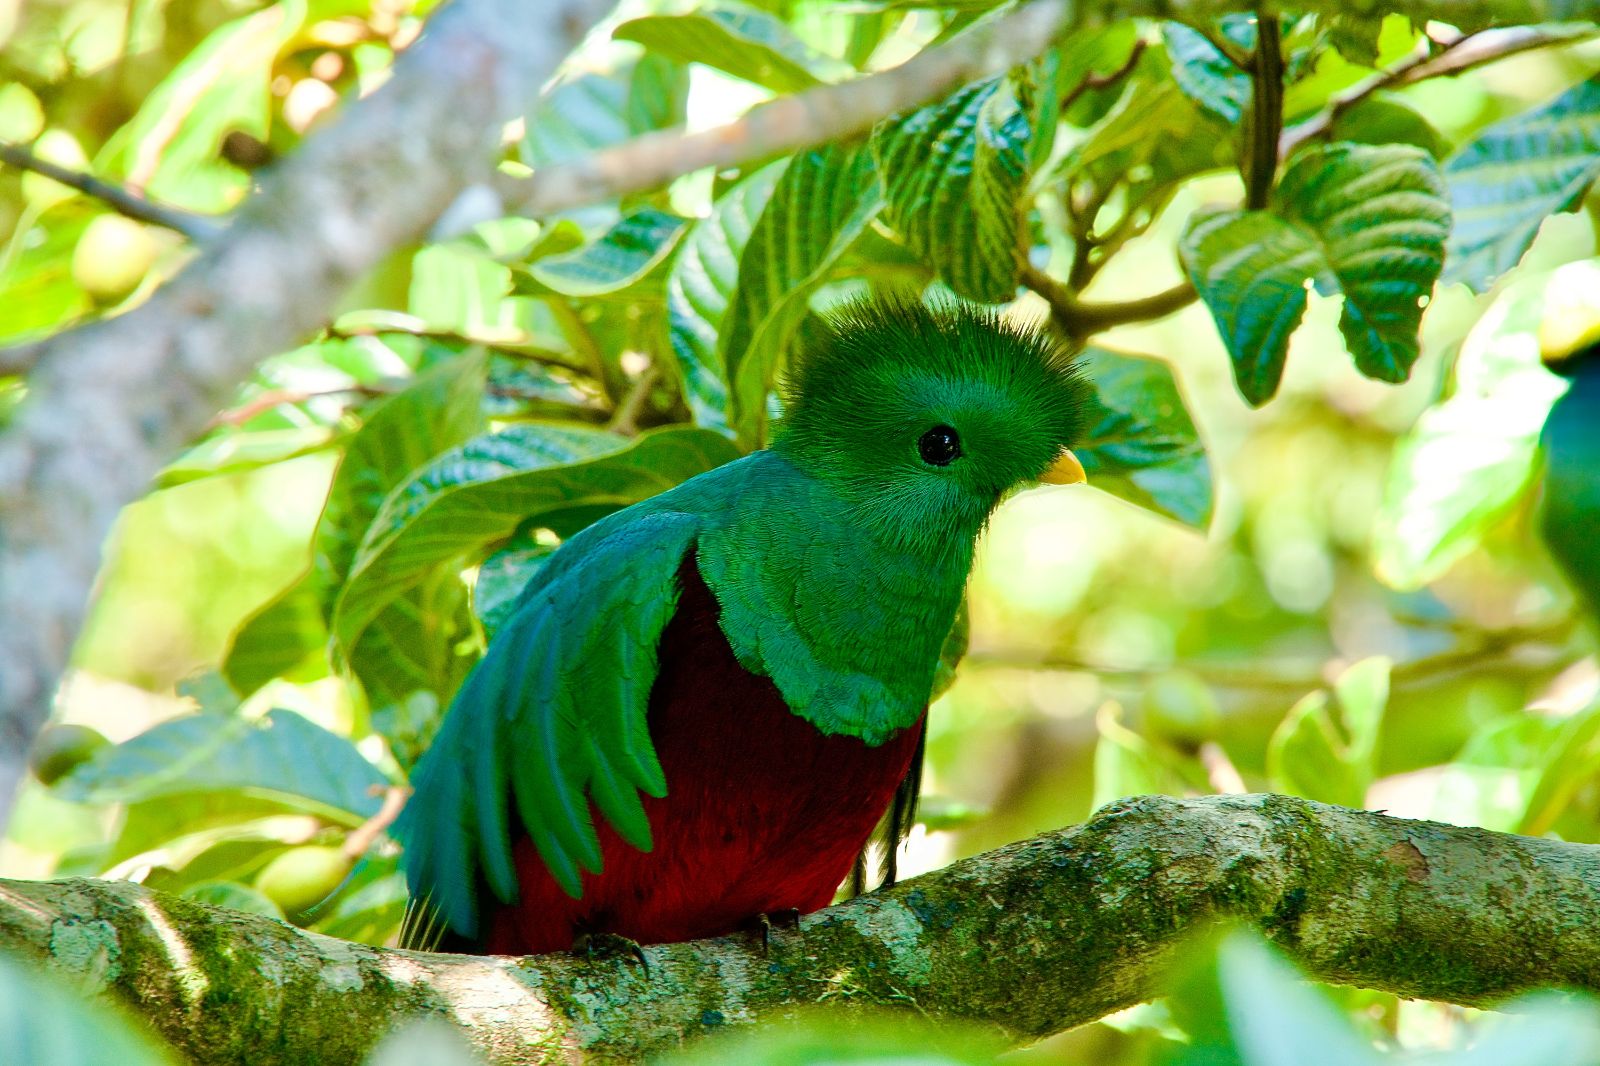 A green and red quetzal native to Panama